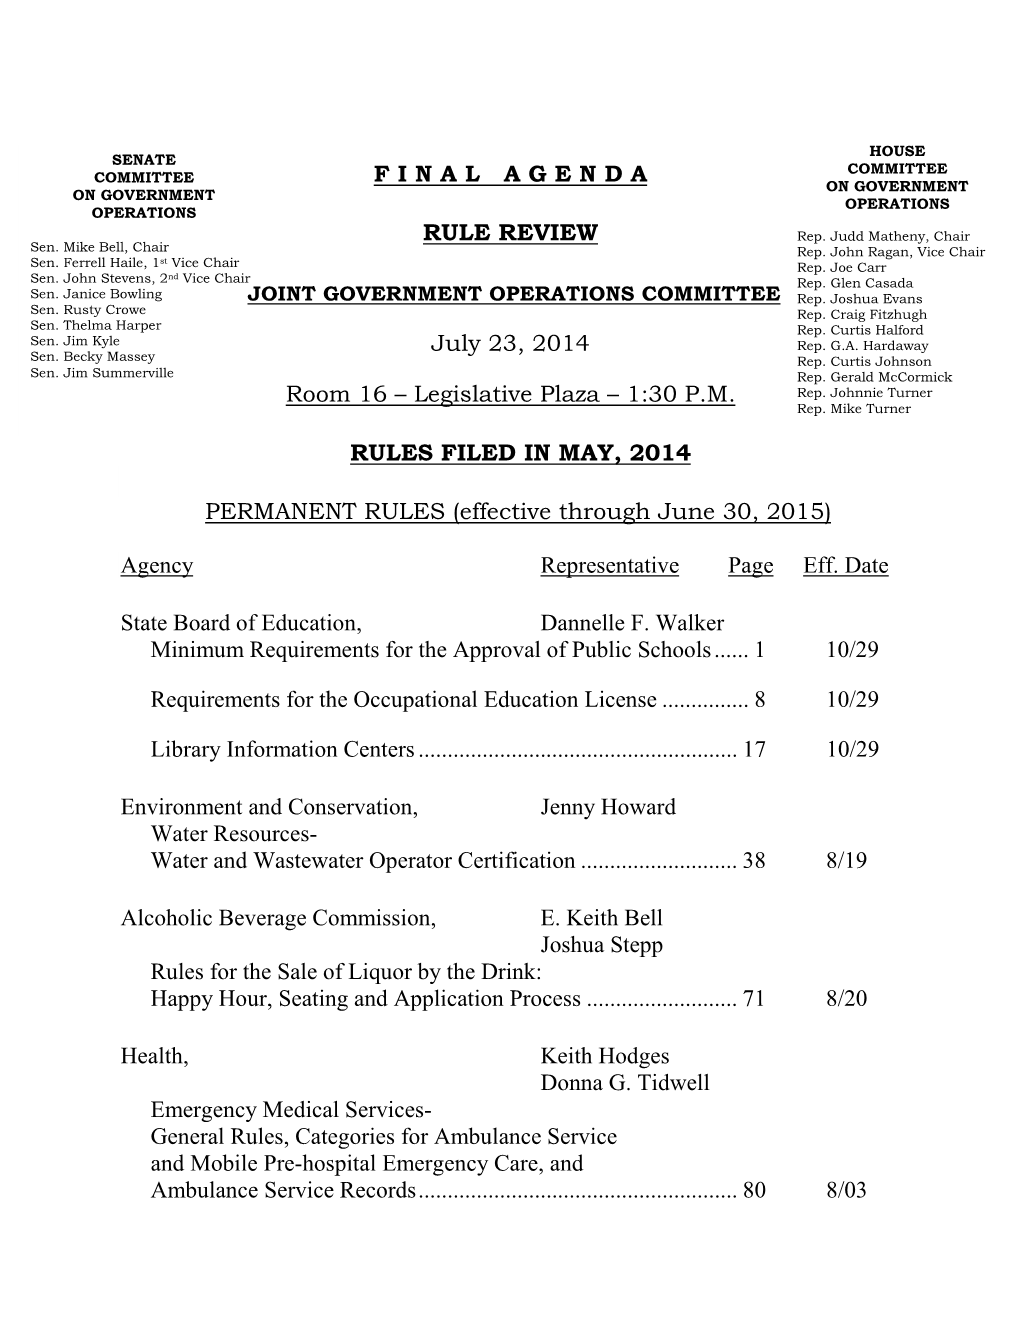 F I N a L a G E N D a RULE REVIEW July 23, 2014 Room 16 – Legislative Plaza – 1:30 P.M. RULES FILED in MAY, 2014 PERMANENT